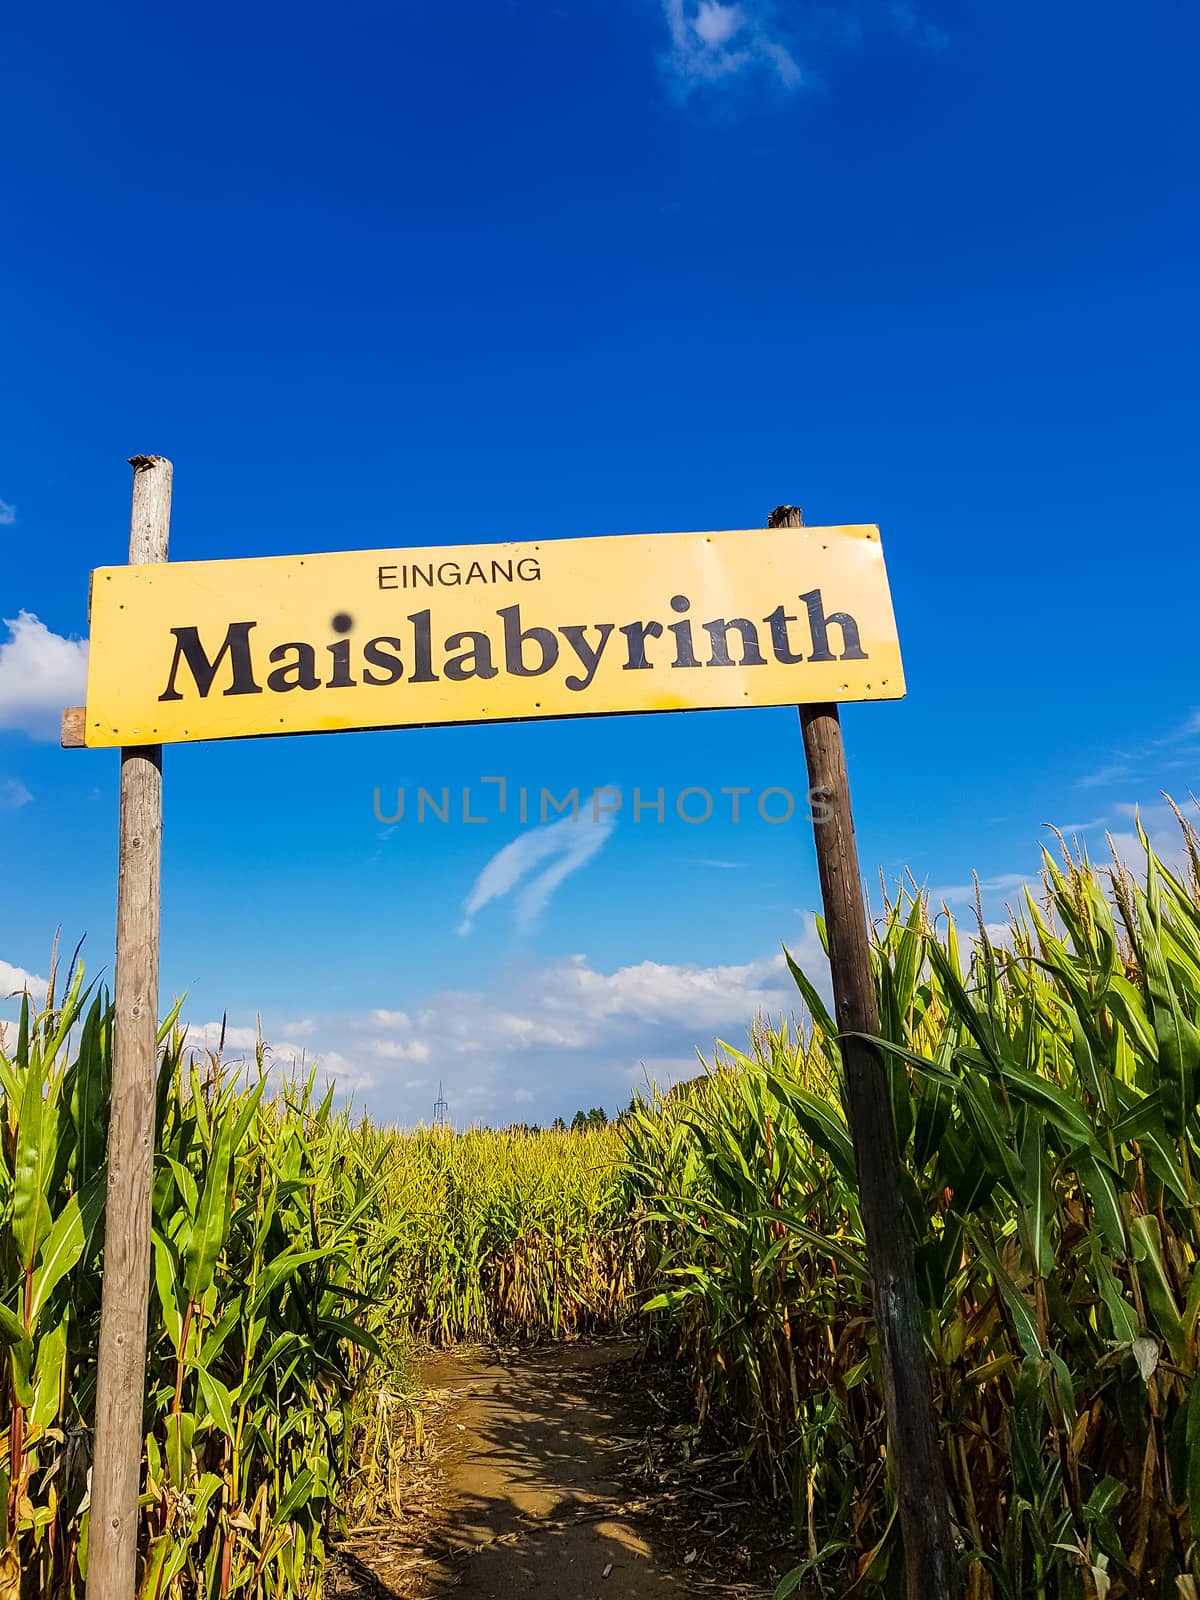 Corn Maze is a maze cut from a corn field. Maize labyrinths are popular with tourists and children. Entrance sign in front of blue sky with lettering in german - entrance Maislabyrinth